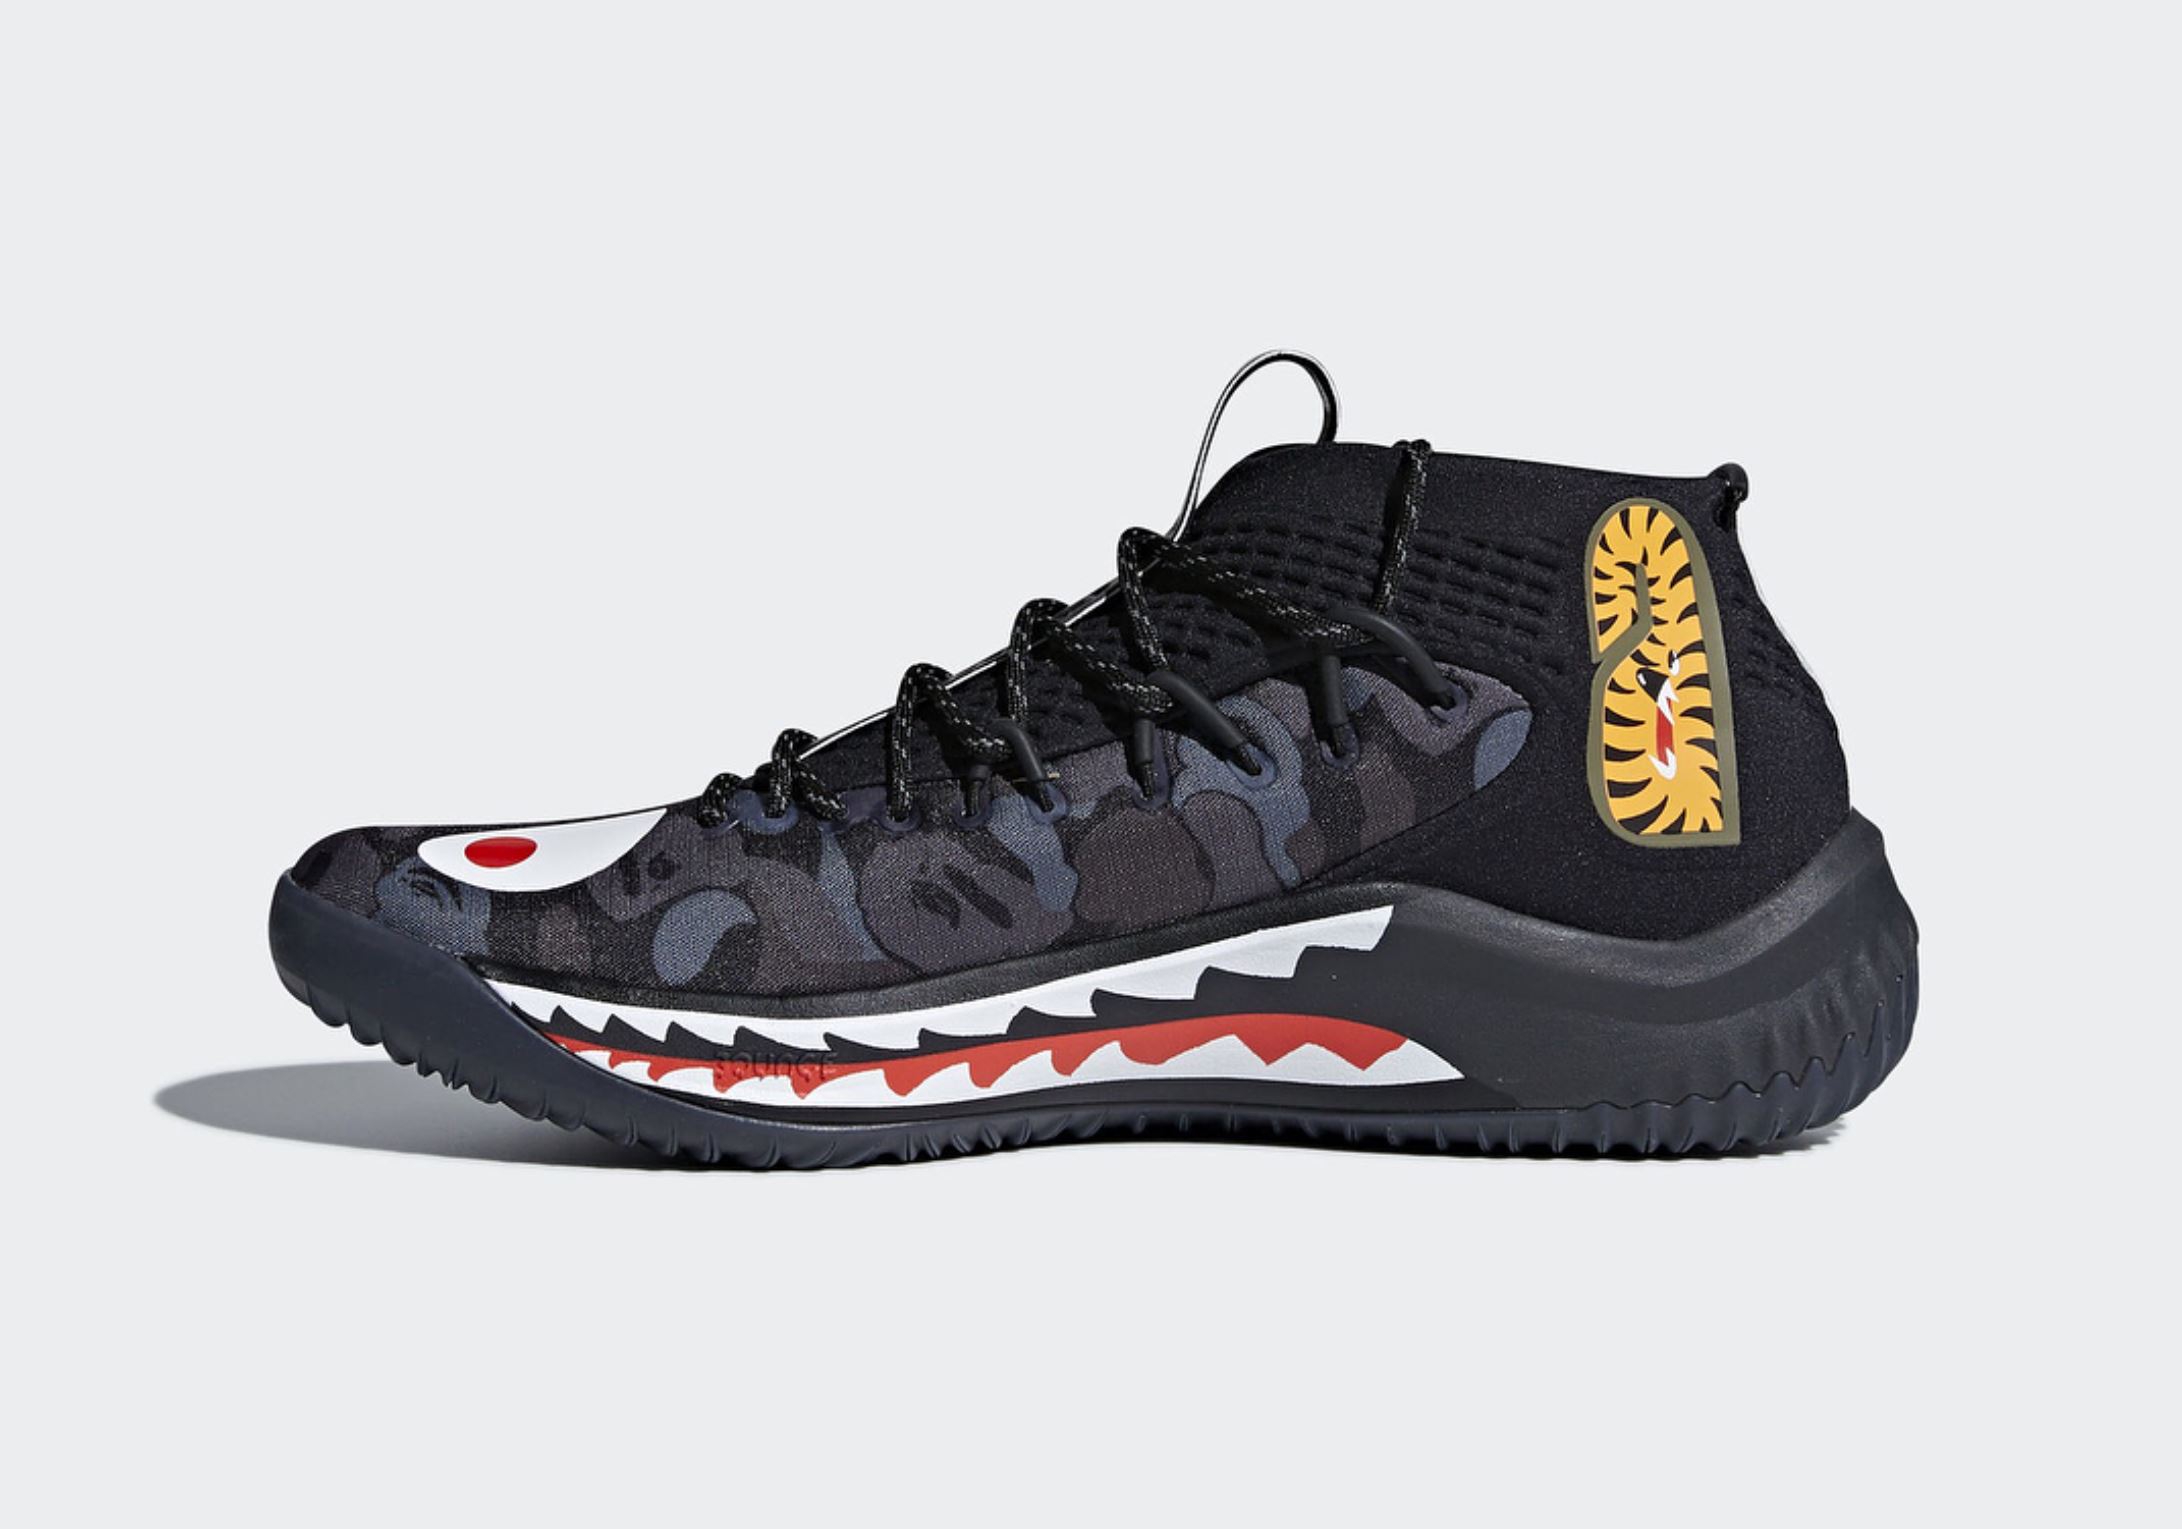 Official Images of the adidas Dame 4 BAPE Colorways for ASW Leak ...